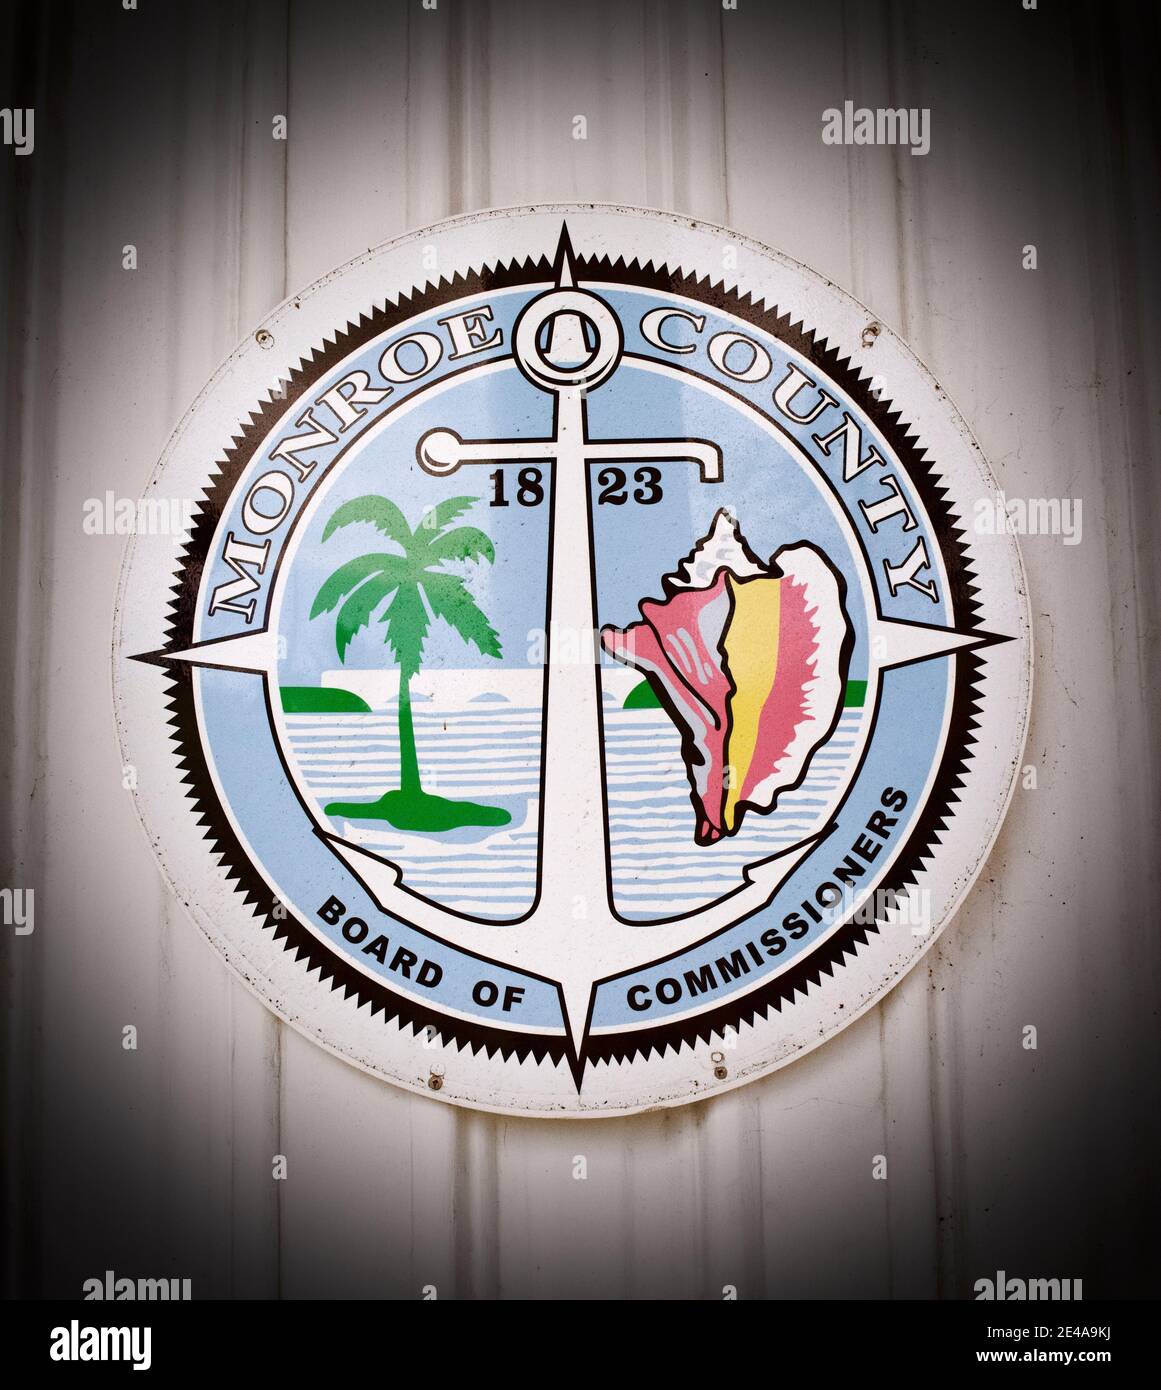 Monroe County, Board of Commissioners seal,  Historic Key West, Florida.  Vacation destination. Stock Photo